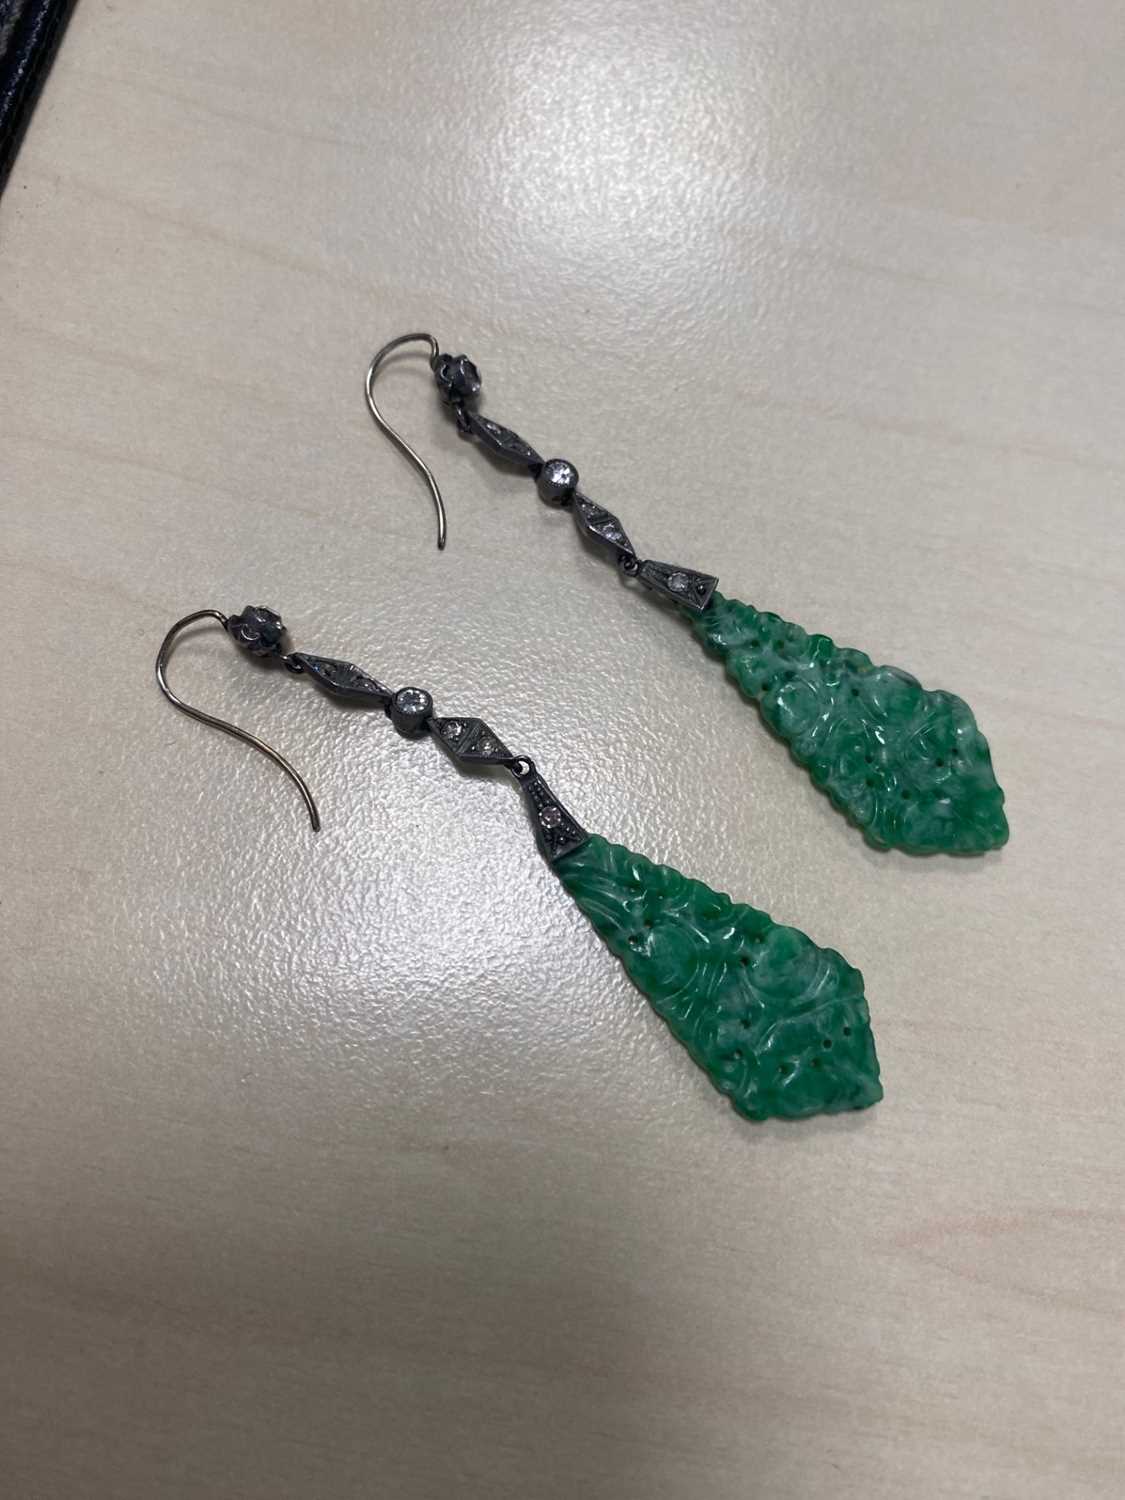 PAIR OF GREEN HARDSTONE AND DIAMOND EARRINGS AND A PENDANT, - Image 2 of 6